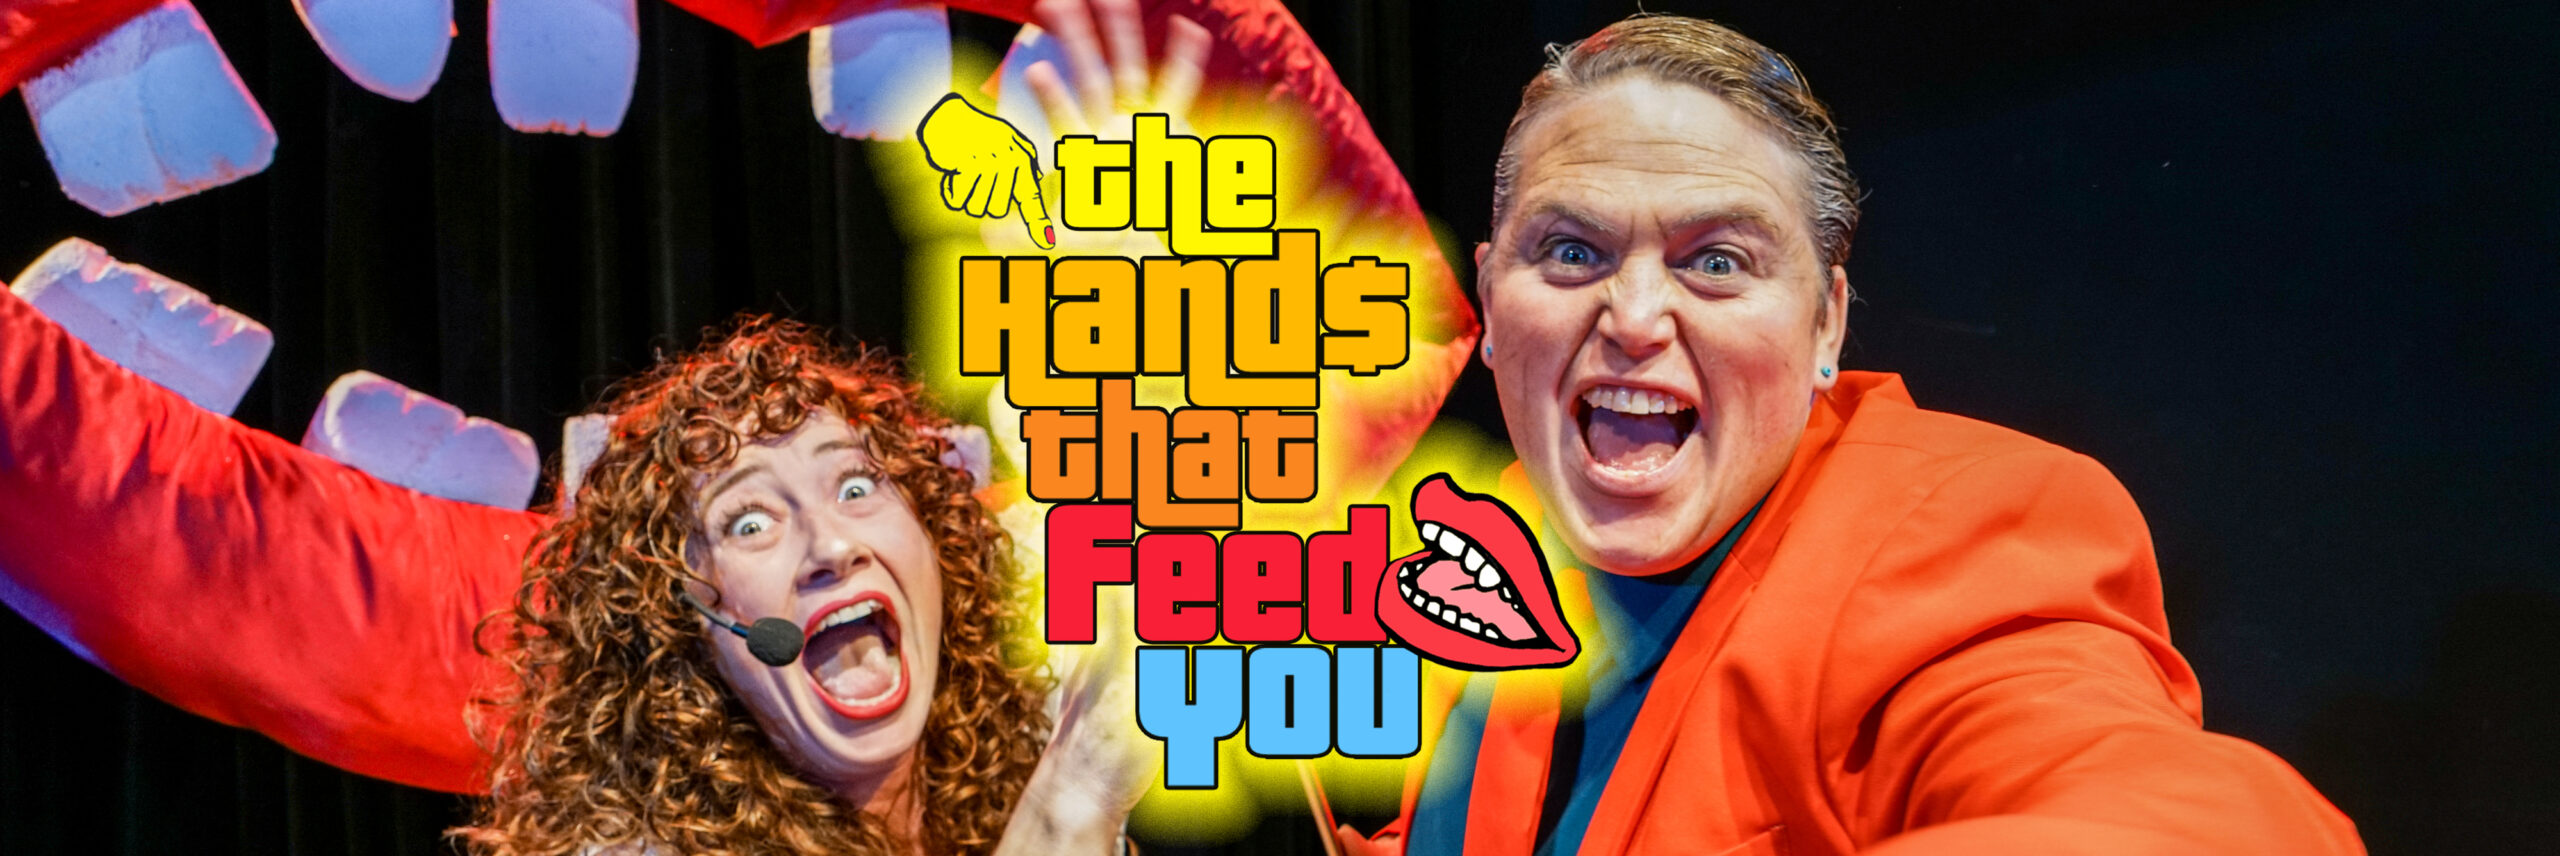 The Hands That Feed You